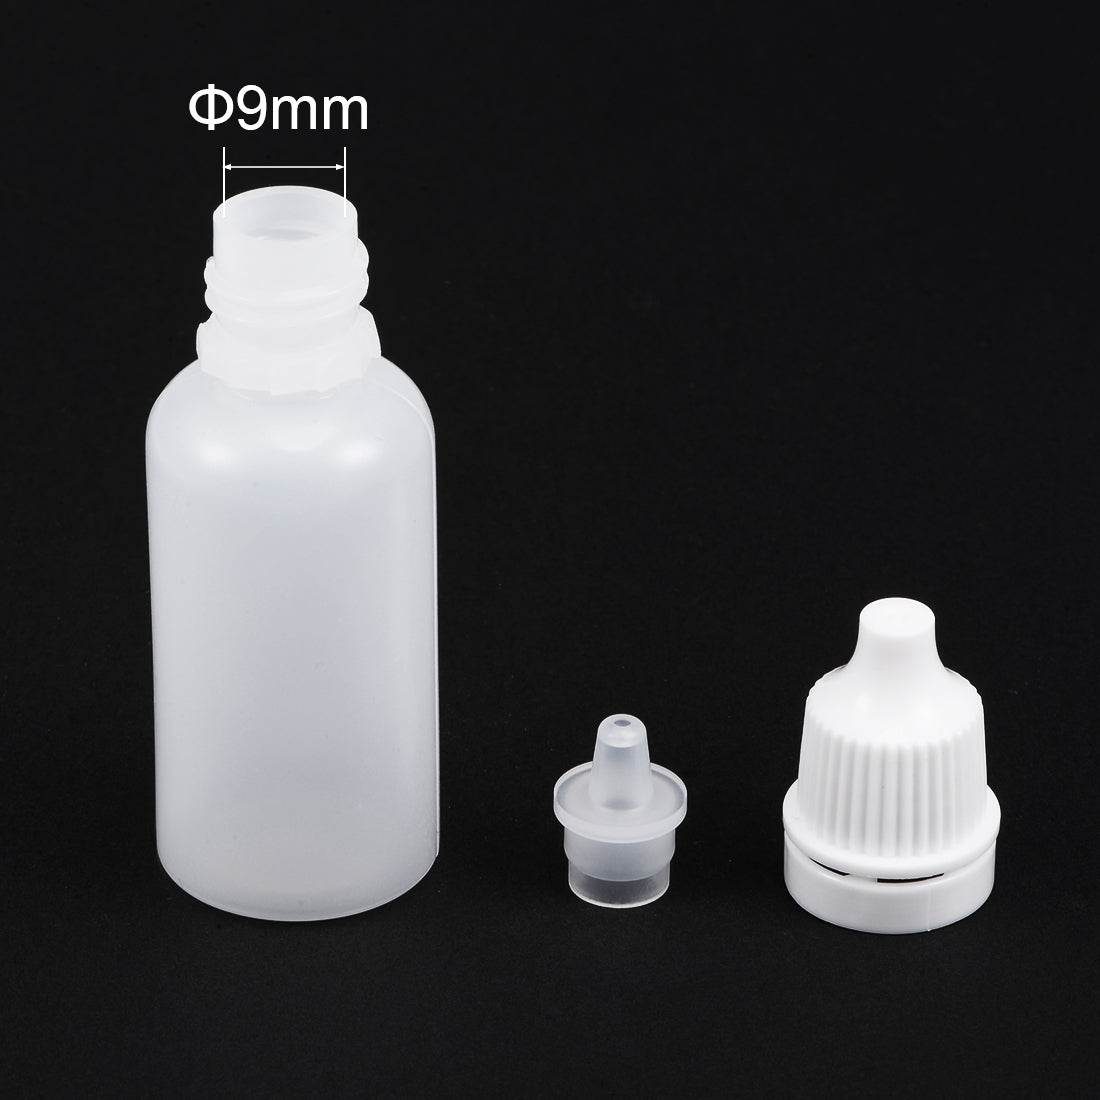 uxcell Uxcell 15ml/0.5 oz Empty Squeezable Dropper Bottle 10pcs